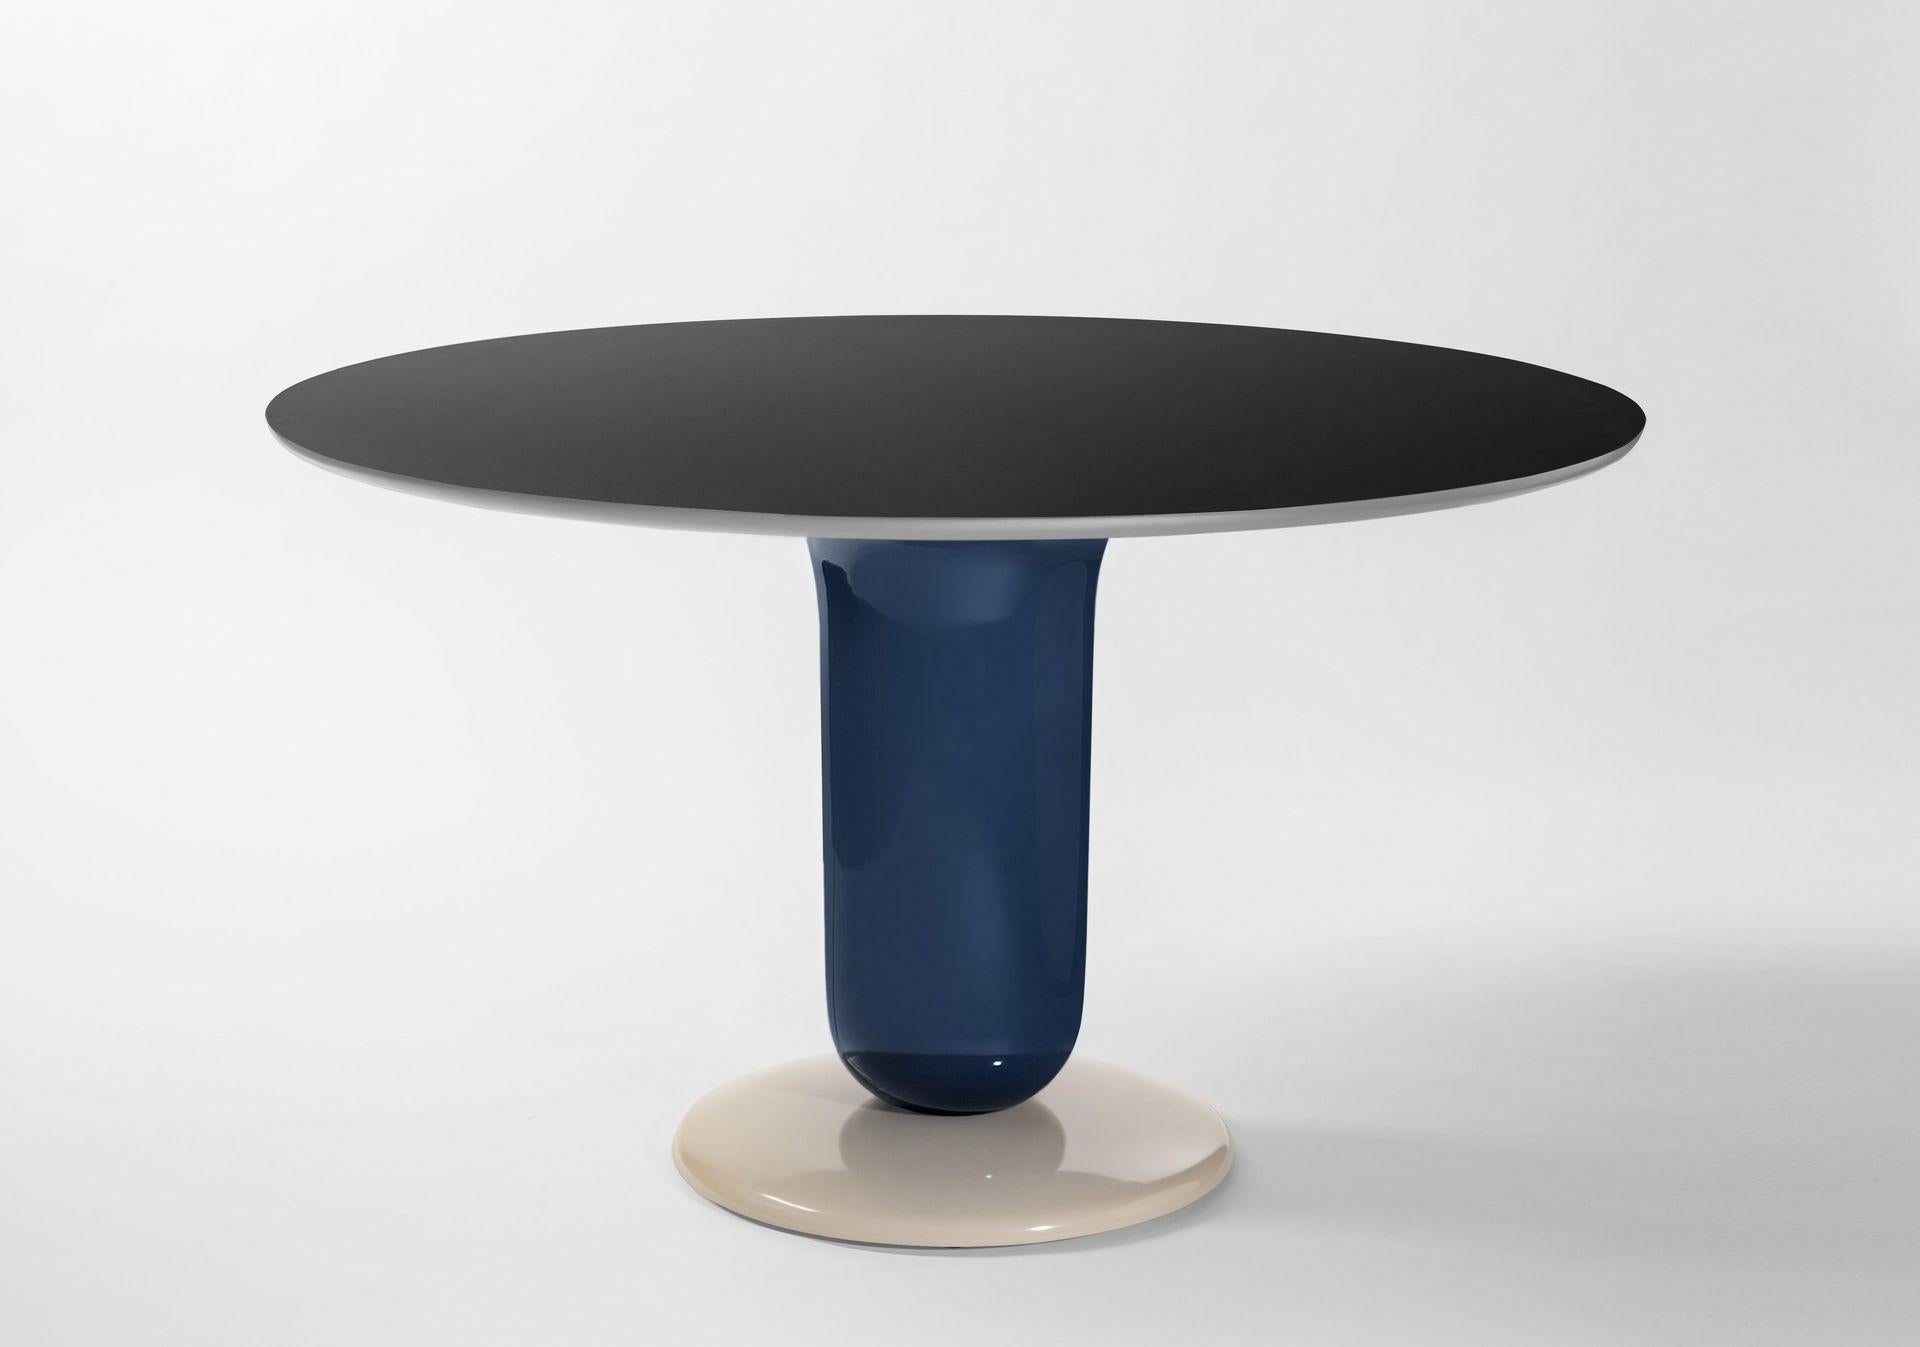 Explorer 4 dining table by Jaime Hayon
Dimensions: Diameter 130 x Height 74 cm 
Materials: Lacquered fiberglass body. Solid turned wooden legs and lacquered. Painted glass tabletop.
Available in sizes Explorer 5A (Diameter 190 cm) and Explorer 5B